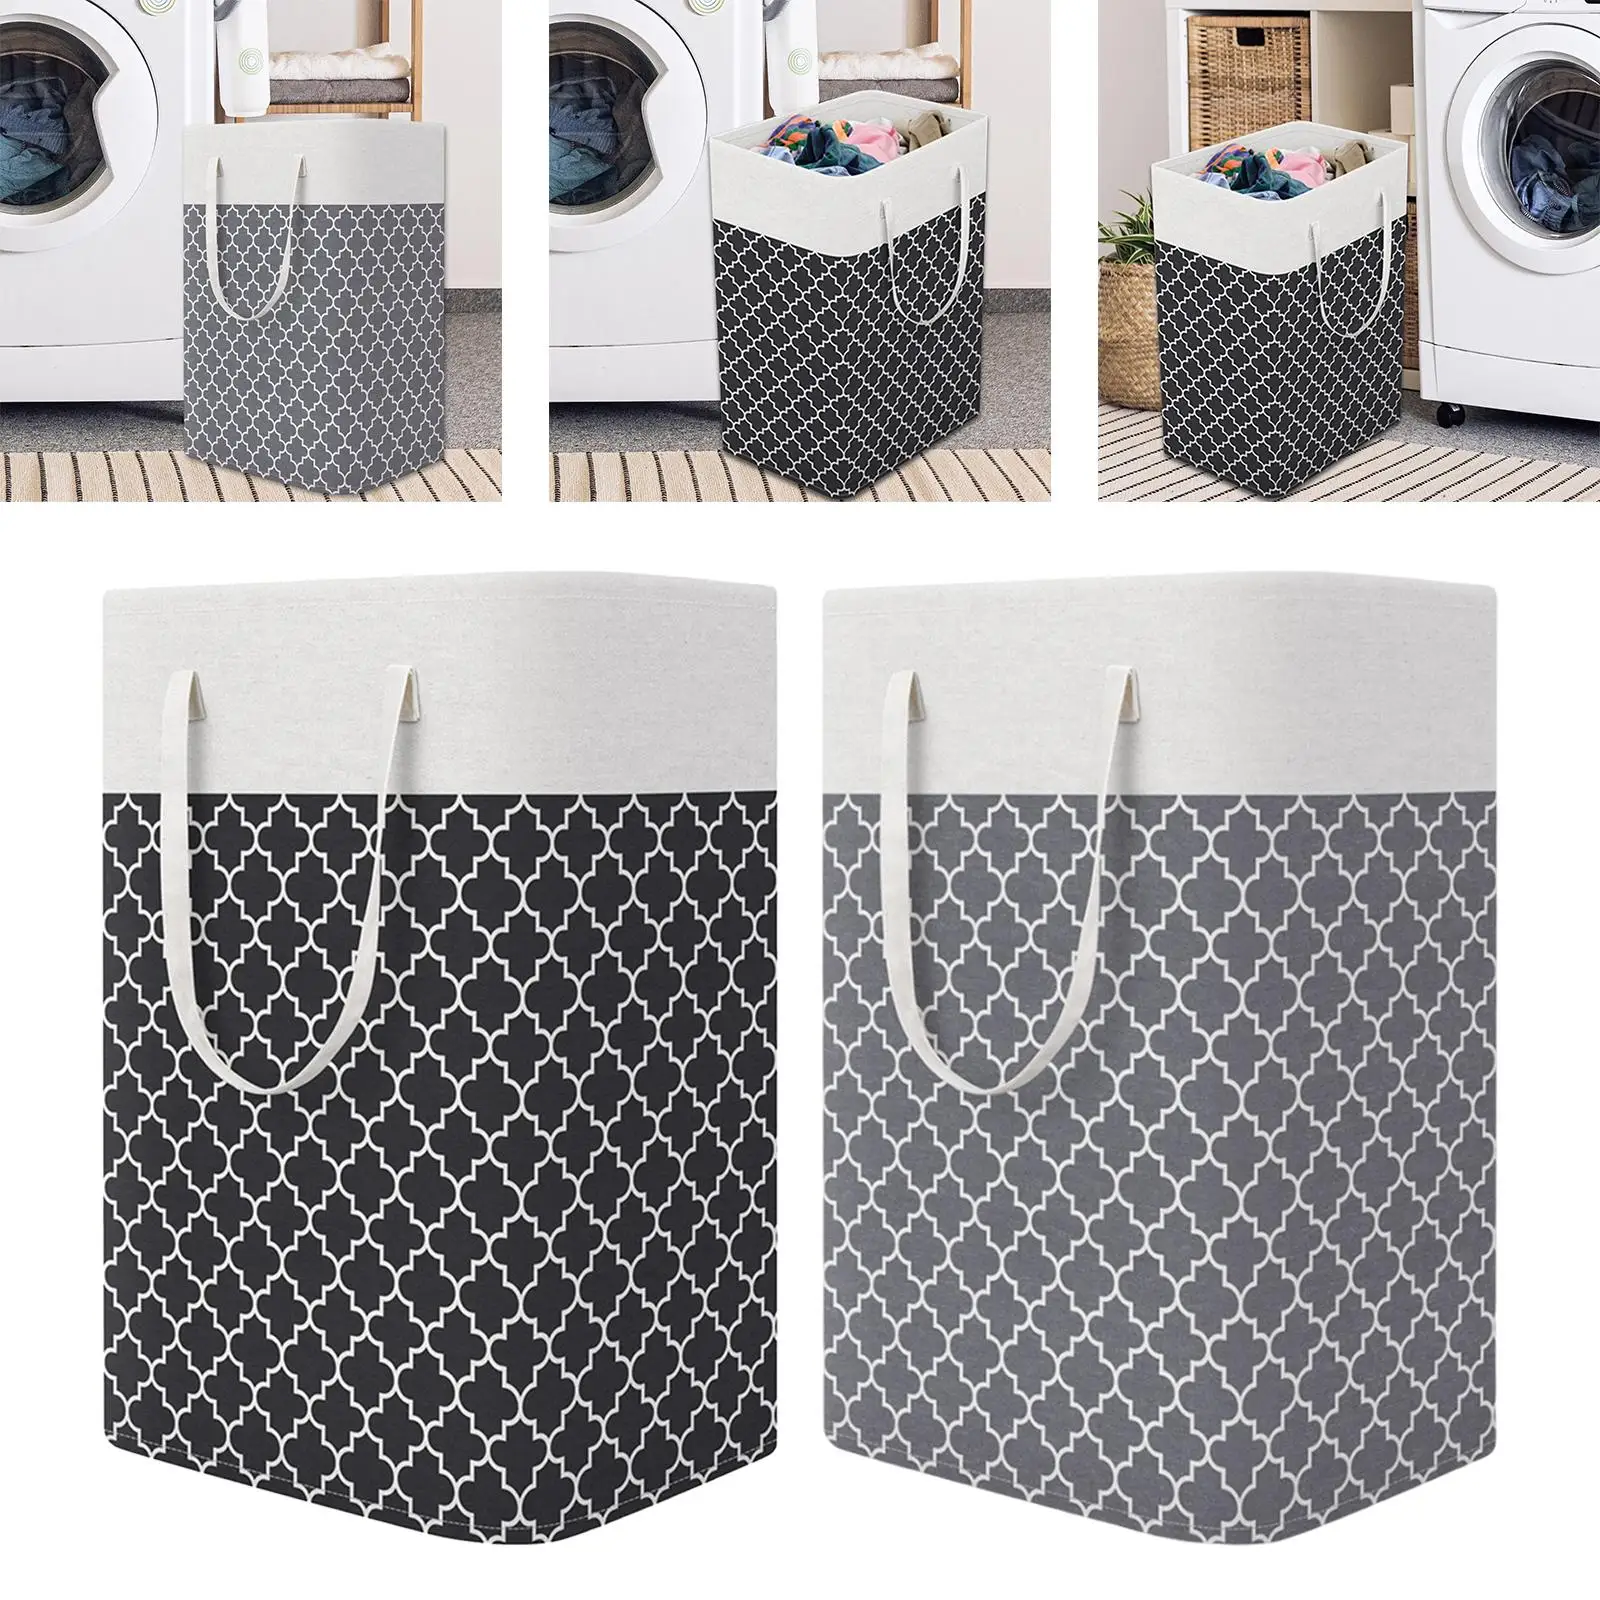 75L Clothes Hamper Foldable Laundry 15.7x11.8x24inch for Bedroom